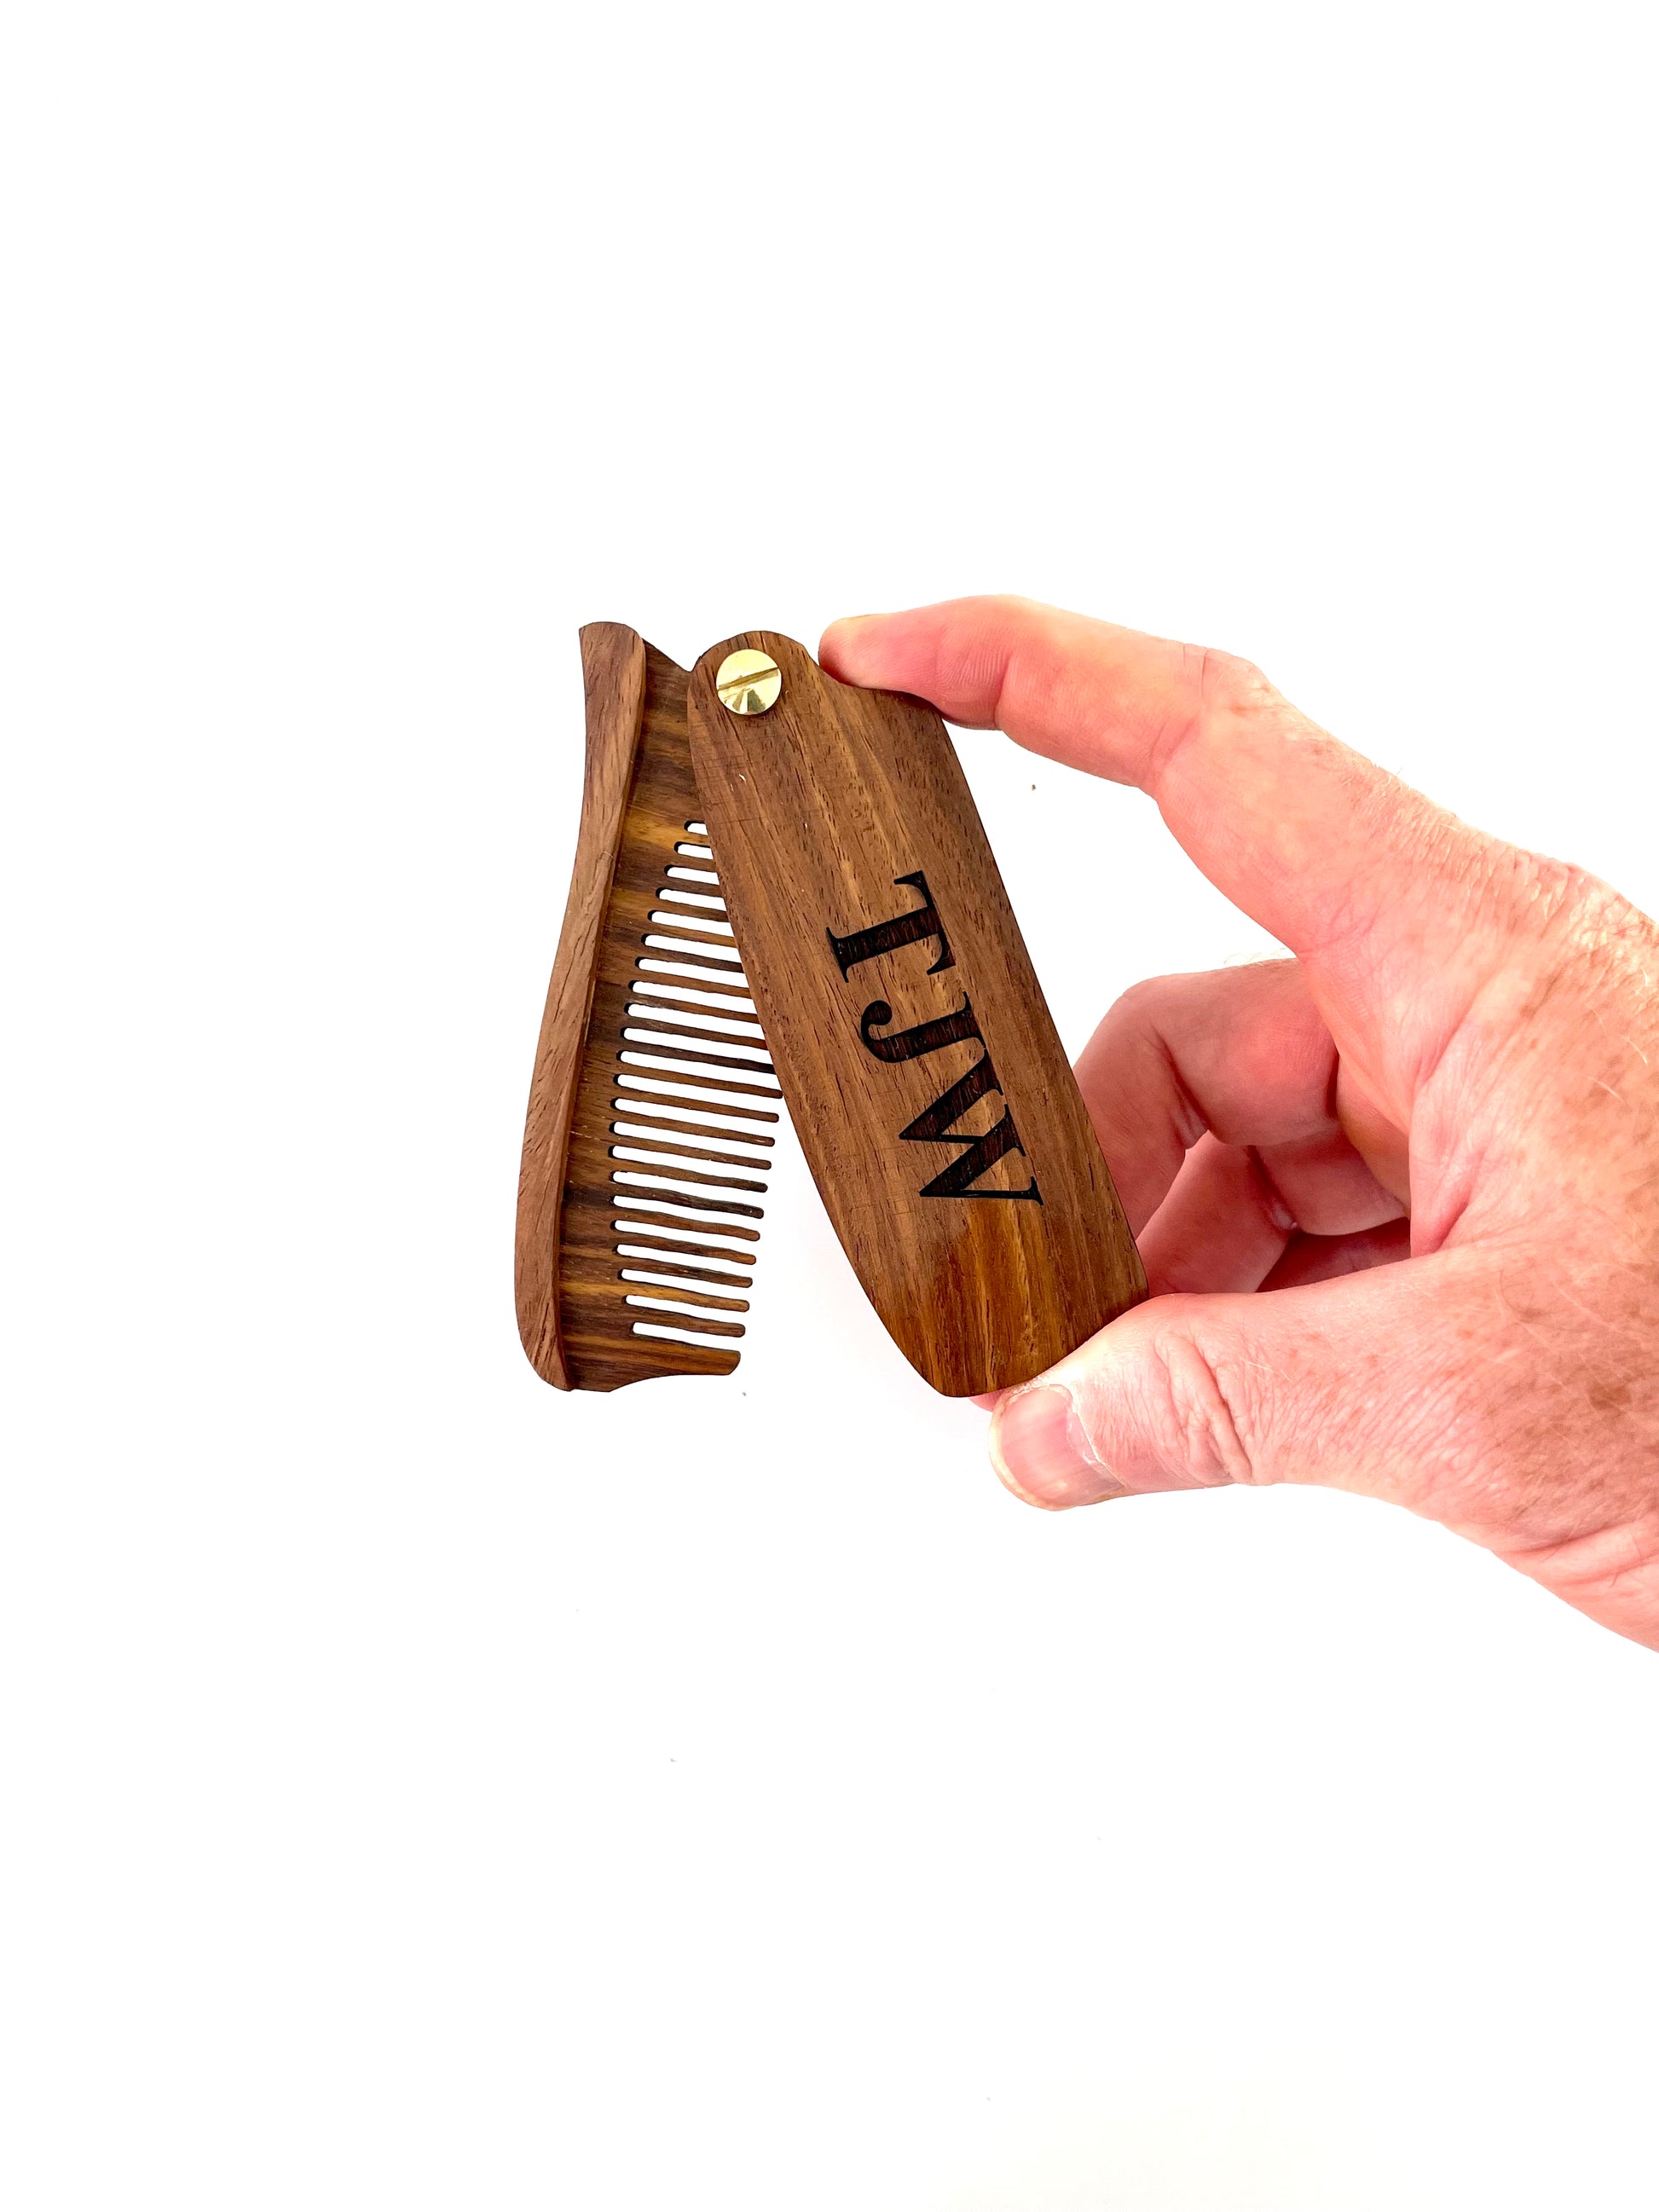 Made from eco friendly lightweight wood, your engraved wood beard comb makes for a unique gift for him.  Your personalized wood beard comb can be single or double sided engraved with letters, numbers or symbols.